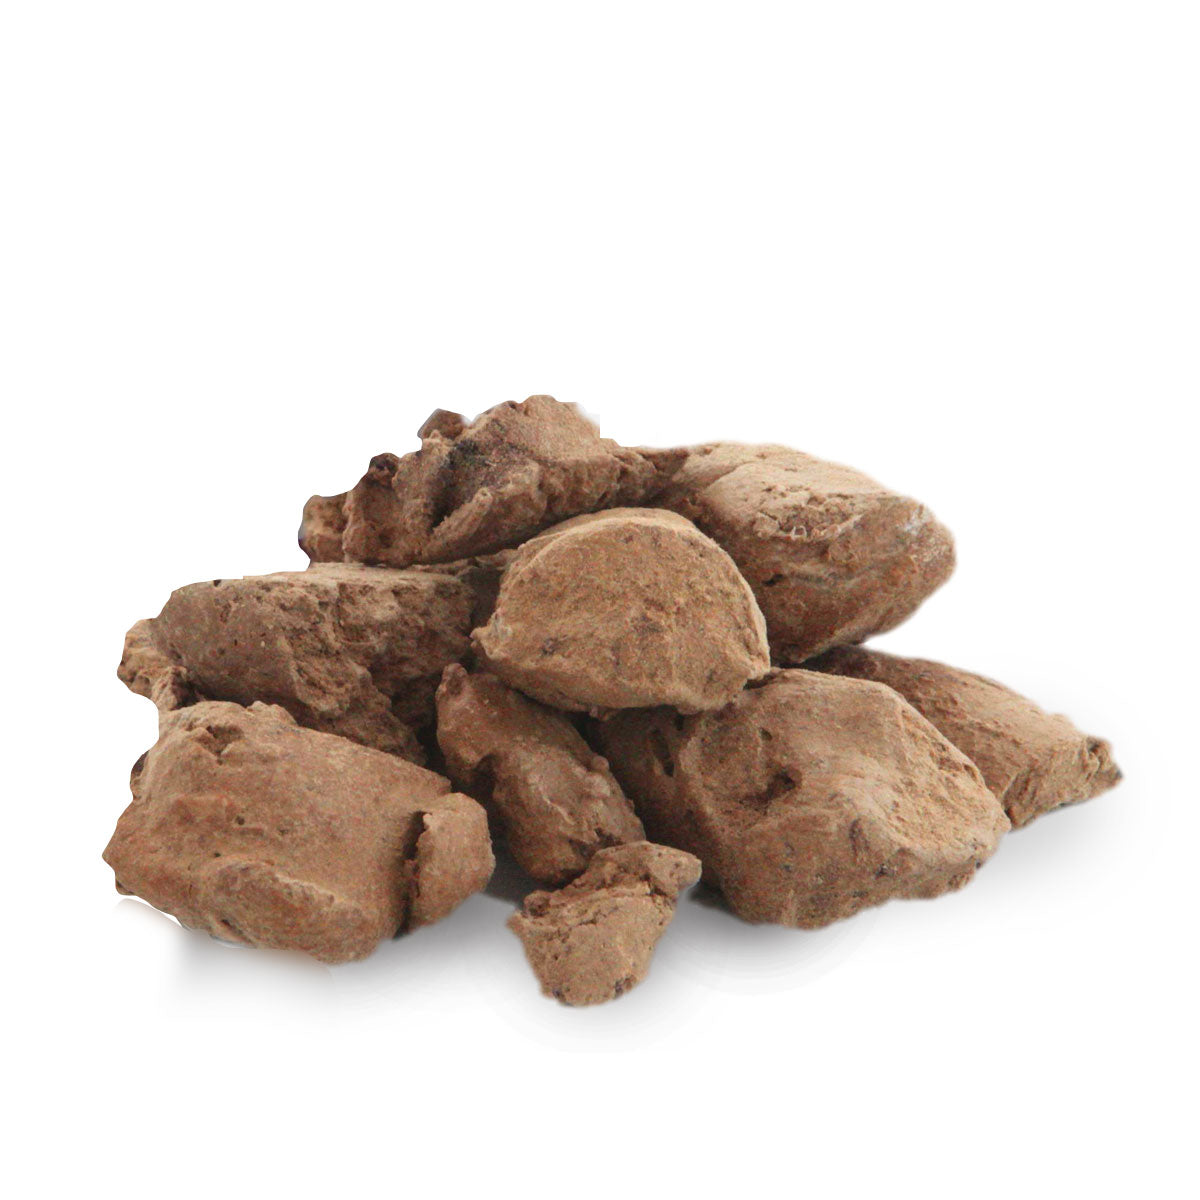 New Zealand freeze dried liver treat for dogs - a delicious treat for dogs with maximum nutrition.